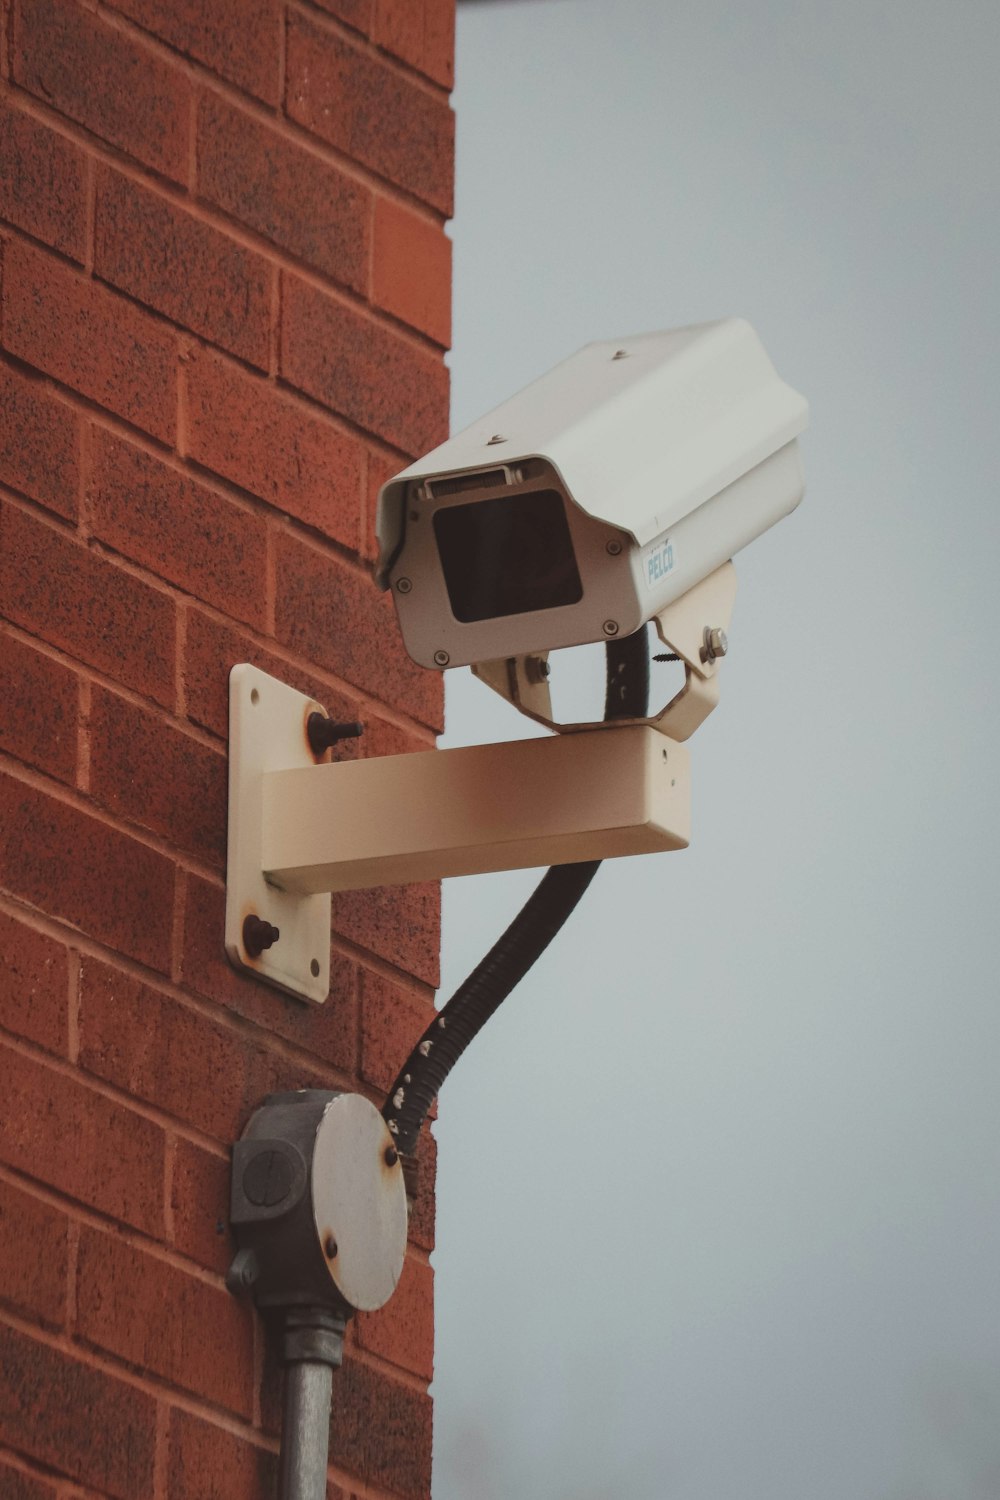 a security camera attached to the side of a brick building